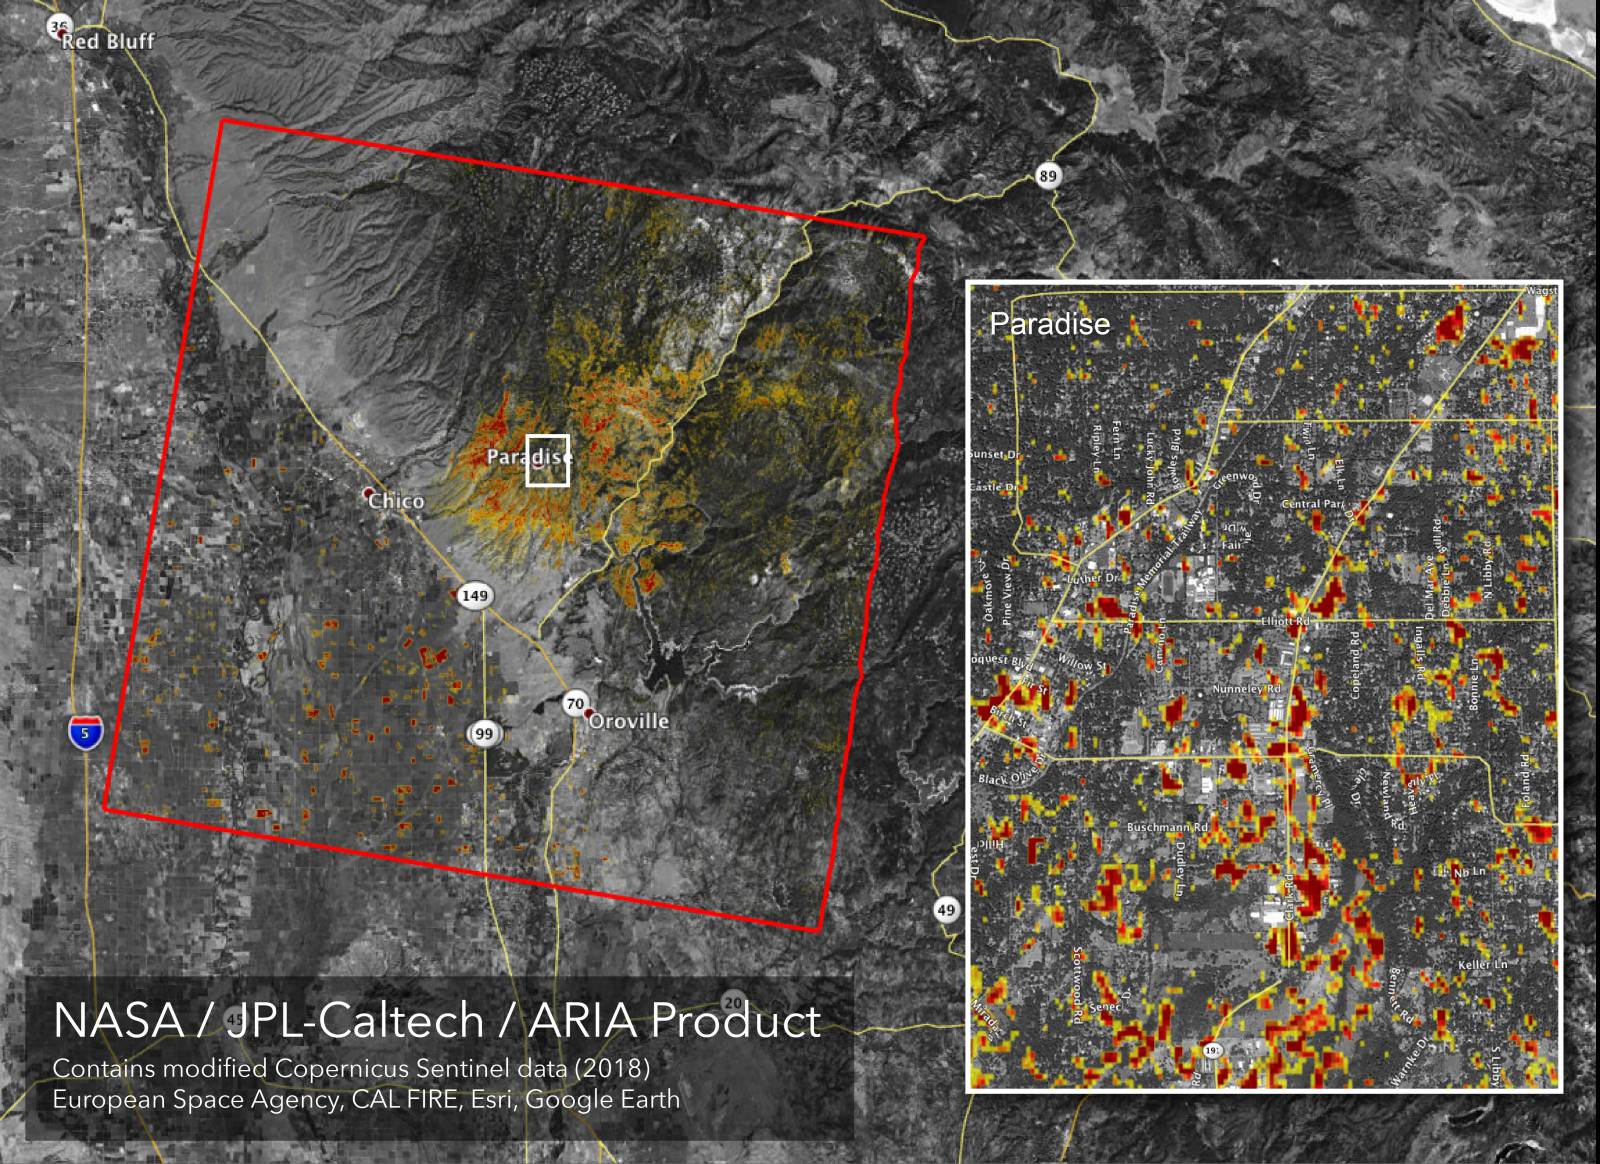 NASA map of damage to Paradise, California, from the Camp Fire, the deadliest wildfire in the state's history. Image credit: NASA/JPL-Caltech